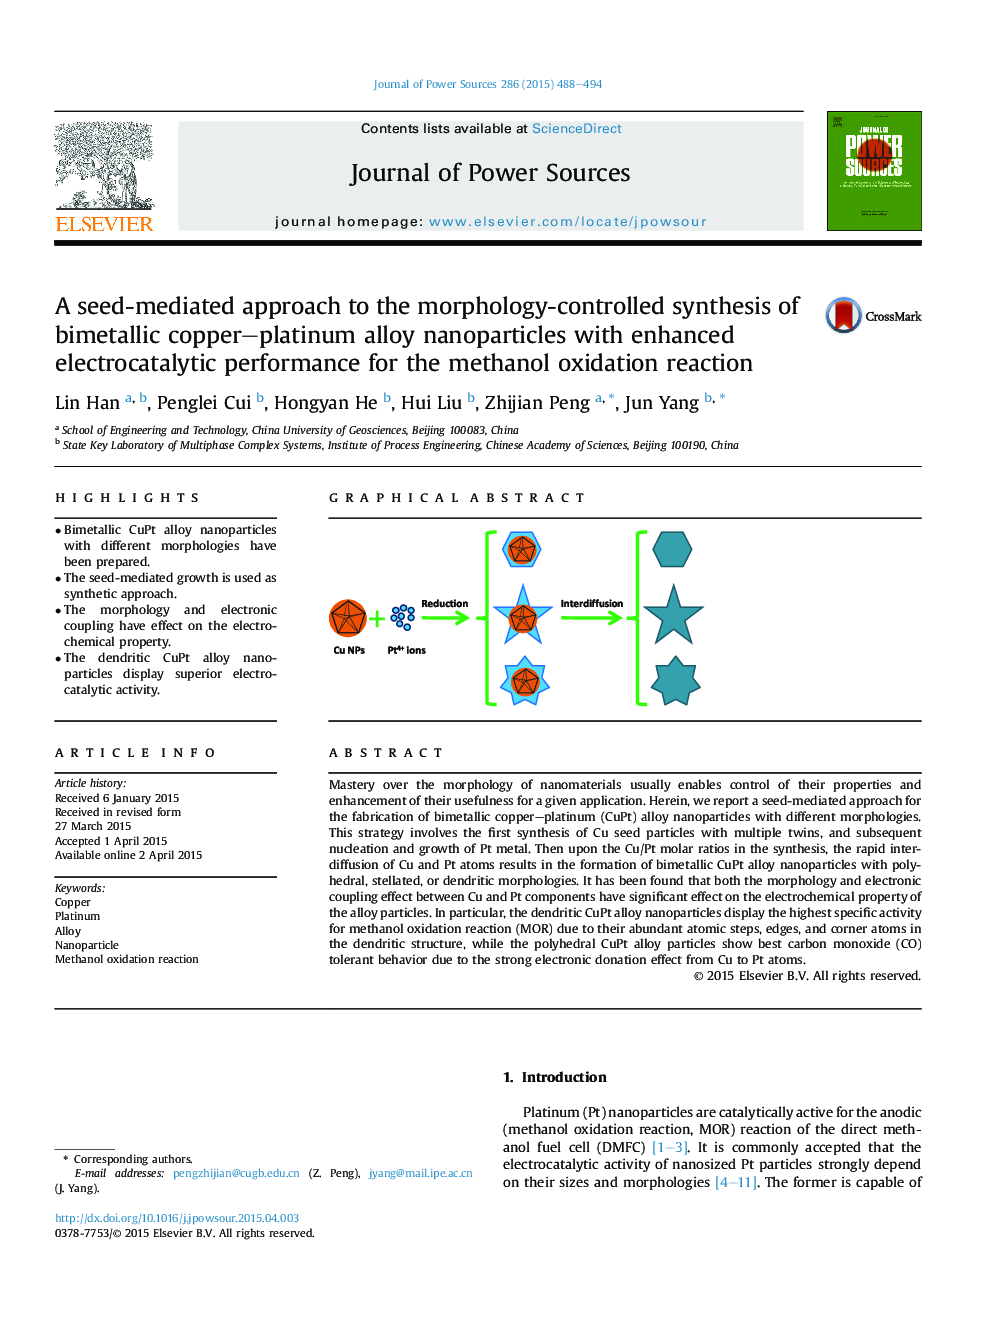 A seed-mediated approach to the morphology-controlled synthesis of bimetallic copper-platinum alloy nanoparticles with enhanced electrocatalytic performance for the methanol oxidation reaction